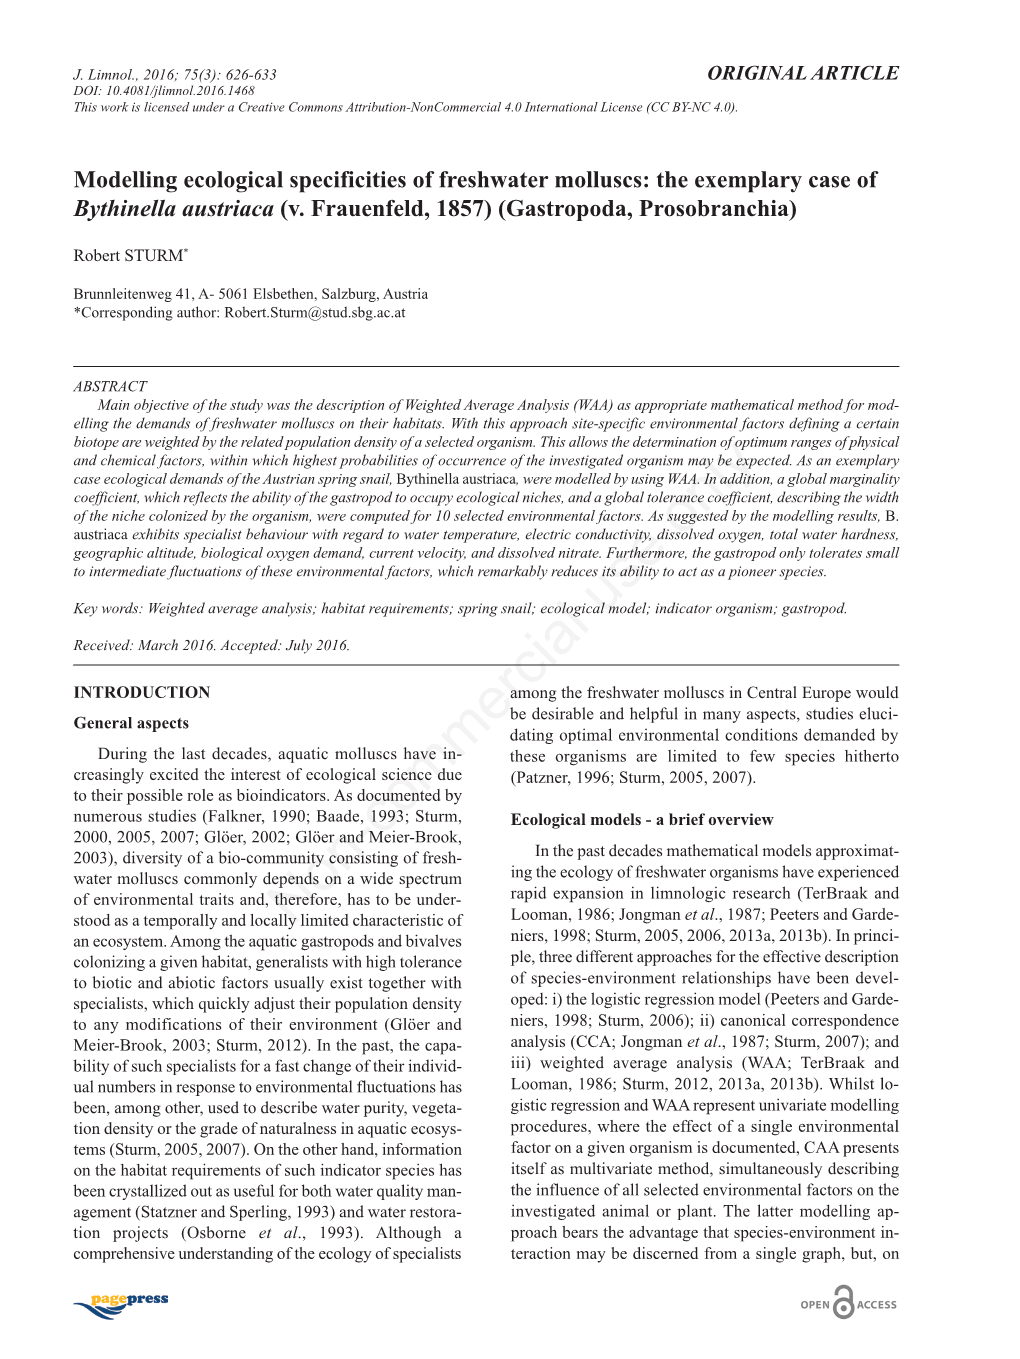 Modelling Ecological Specificities of Freshwater Molluscs: the Exemplary Case of Bythinella Austriaca (V